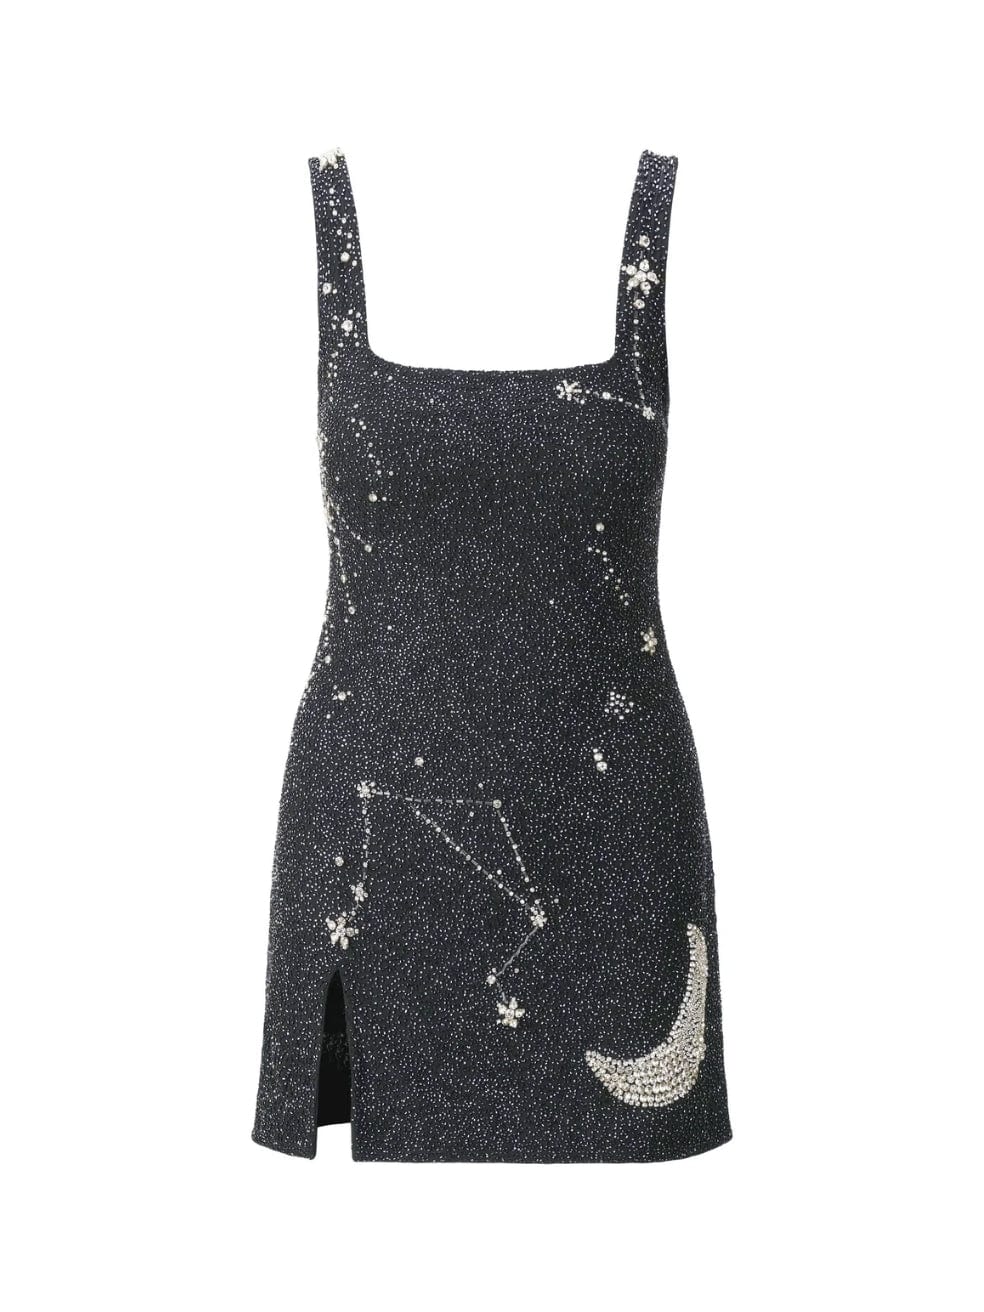 Le Sable Dress in Starry Night